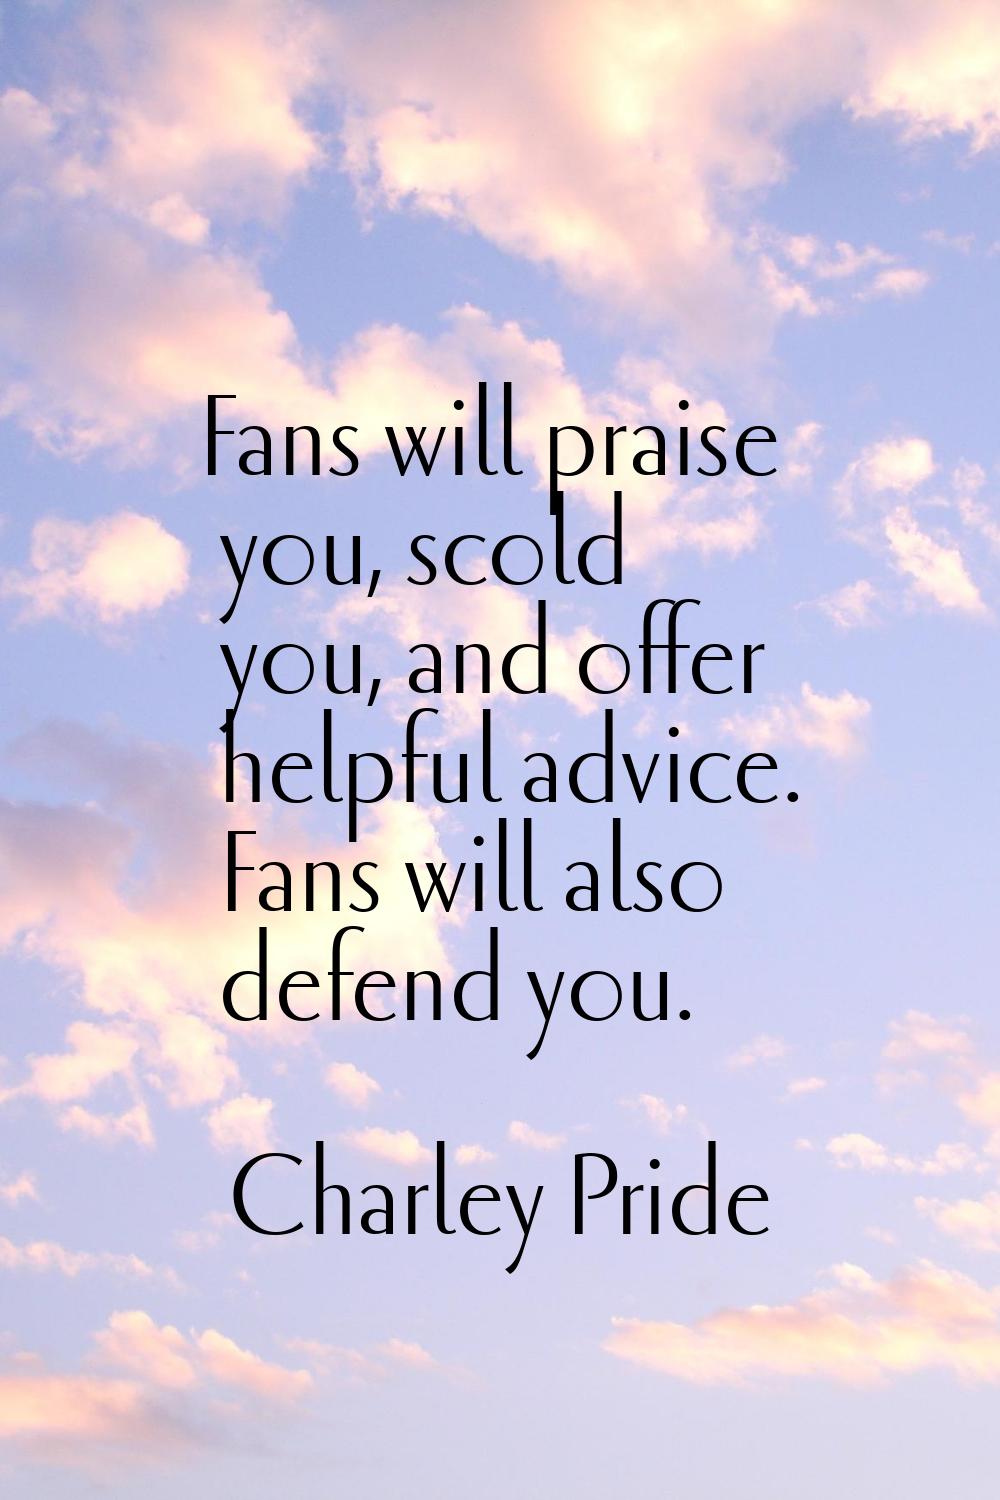 Fans will praise you, scold you, and offer helpful advice. Fans will also defend you.